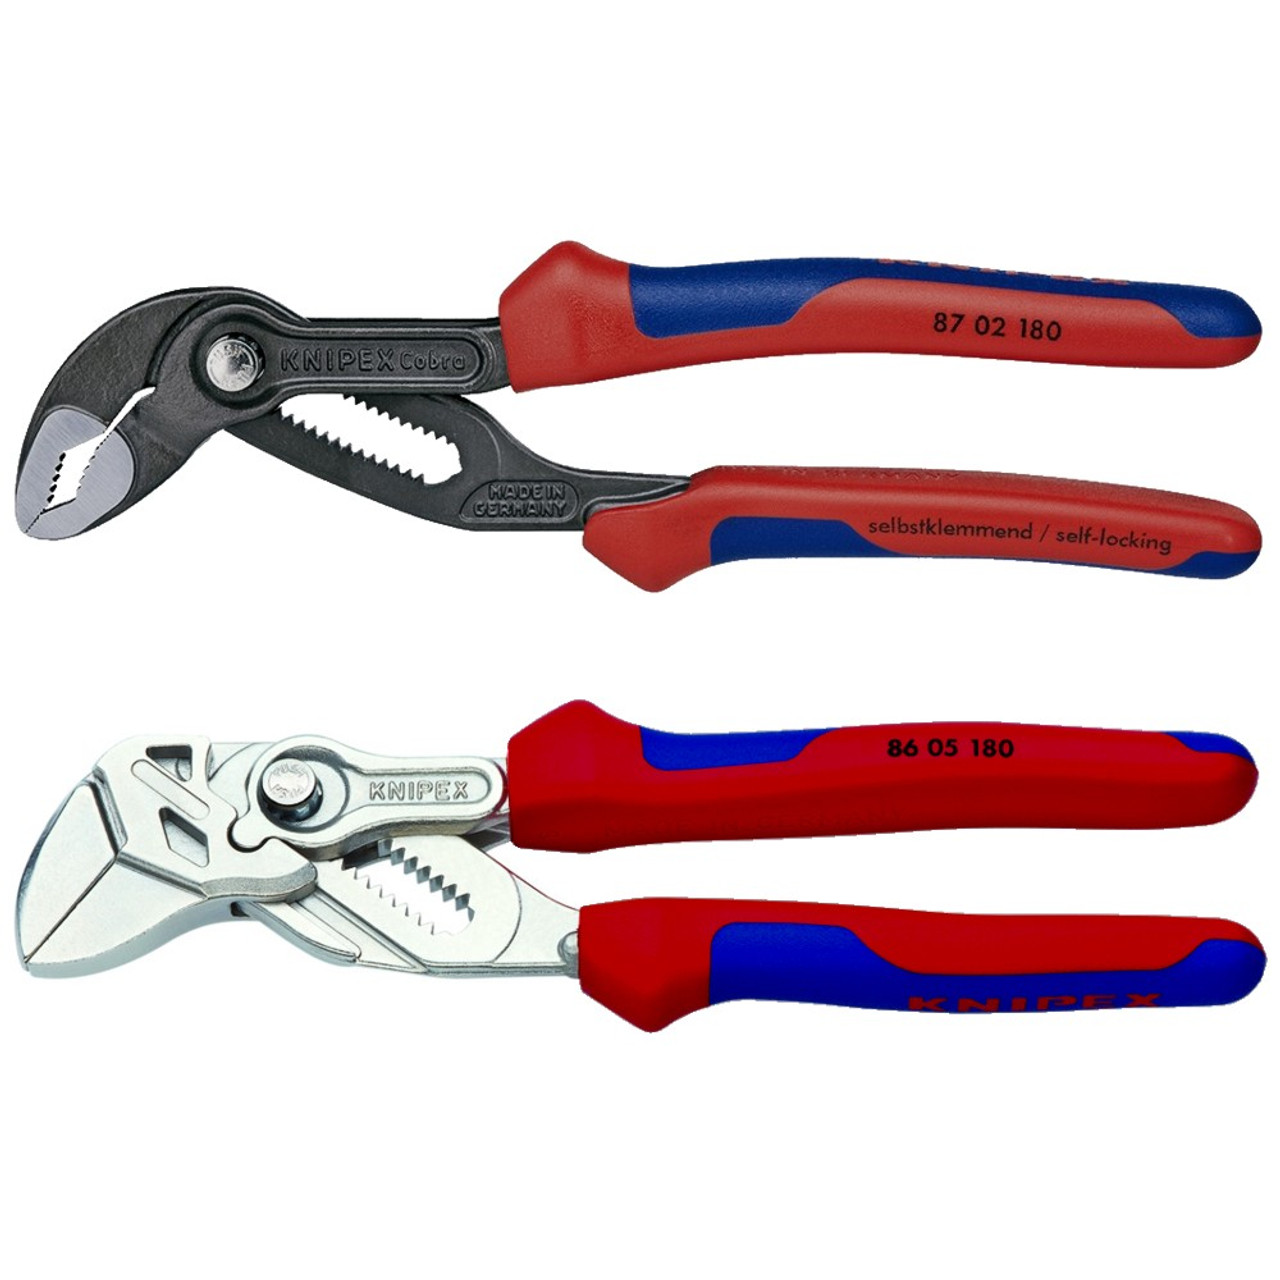 Knipex 7-1/4 Cobra & Adjustable Pliers Wrench Set w Comfort Grip Handles -  Bowers Tool Co.